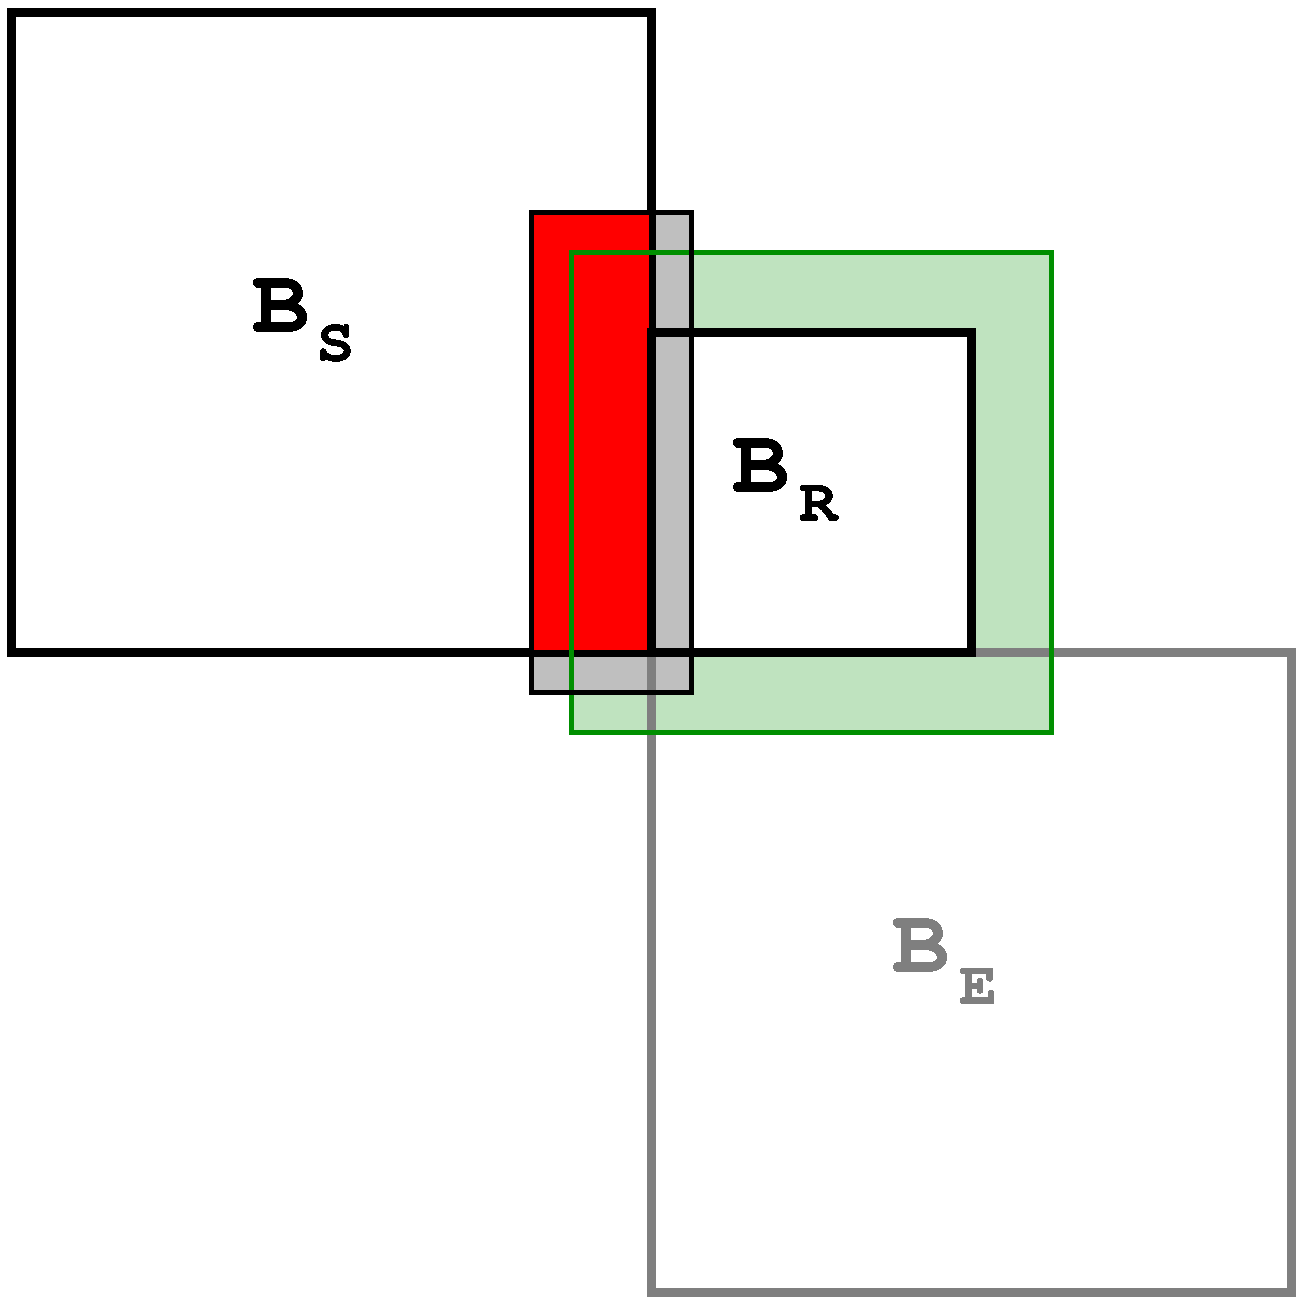 image illustrating the inter-relationship between sending (coarse) block Bs, receiving (fine) block Br, and extra blocks Be.